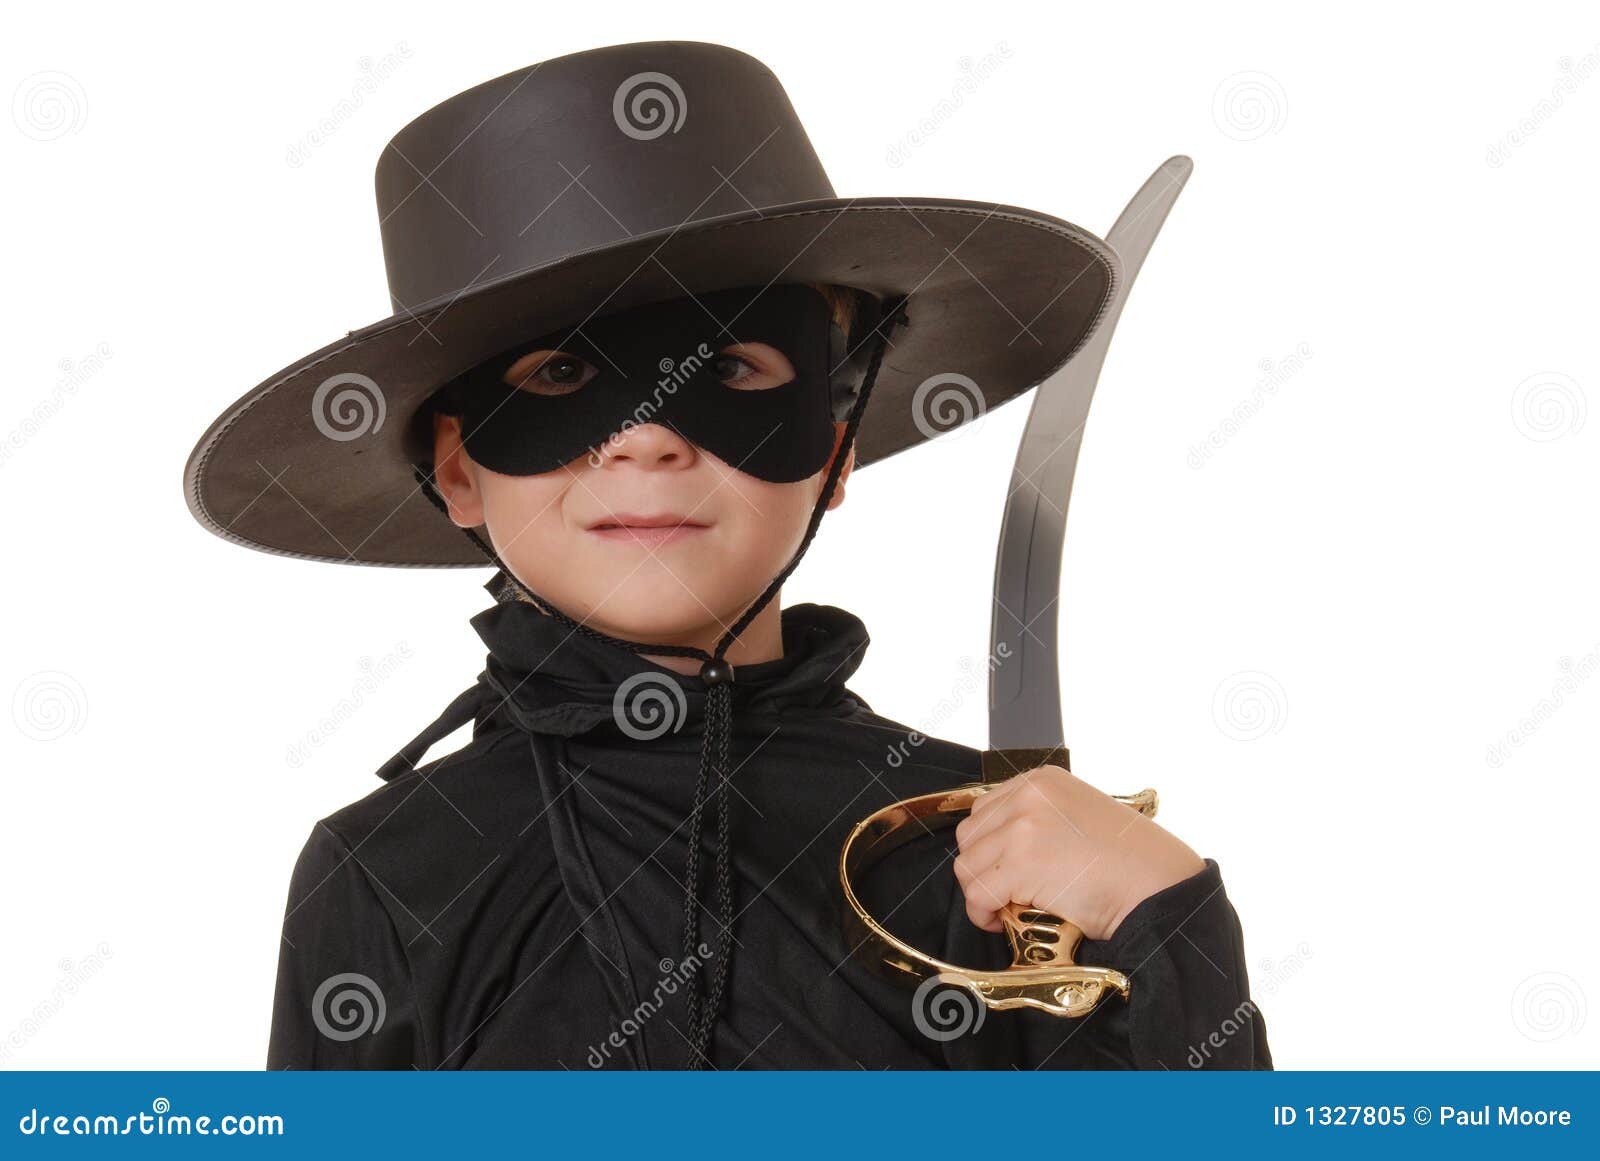 zorro of the old west 9